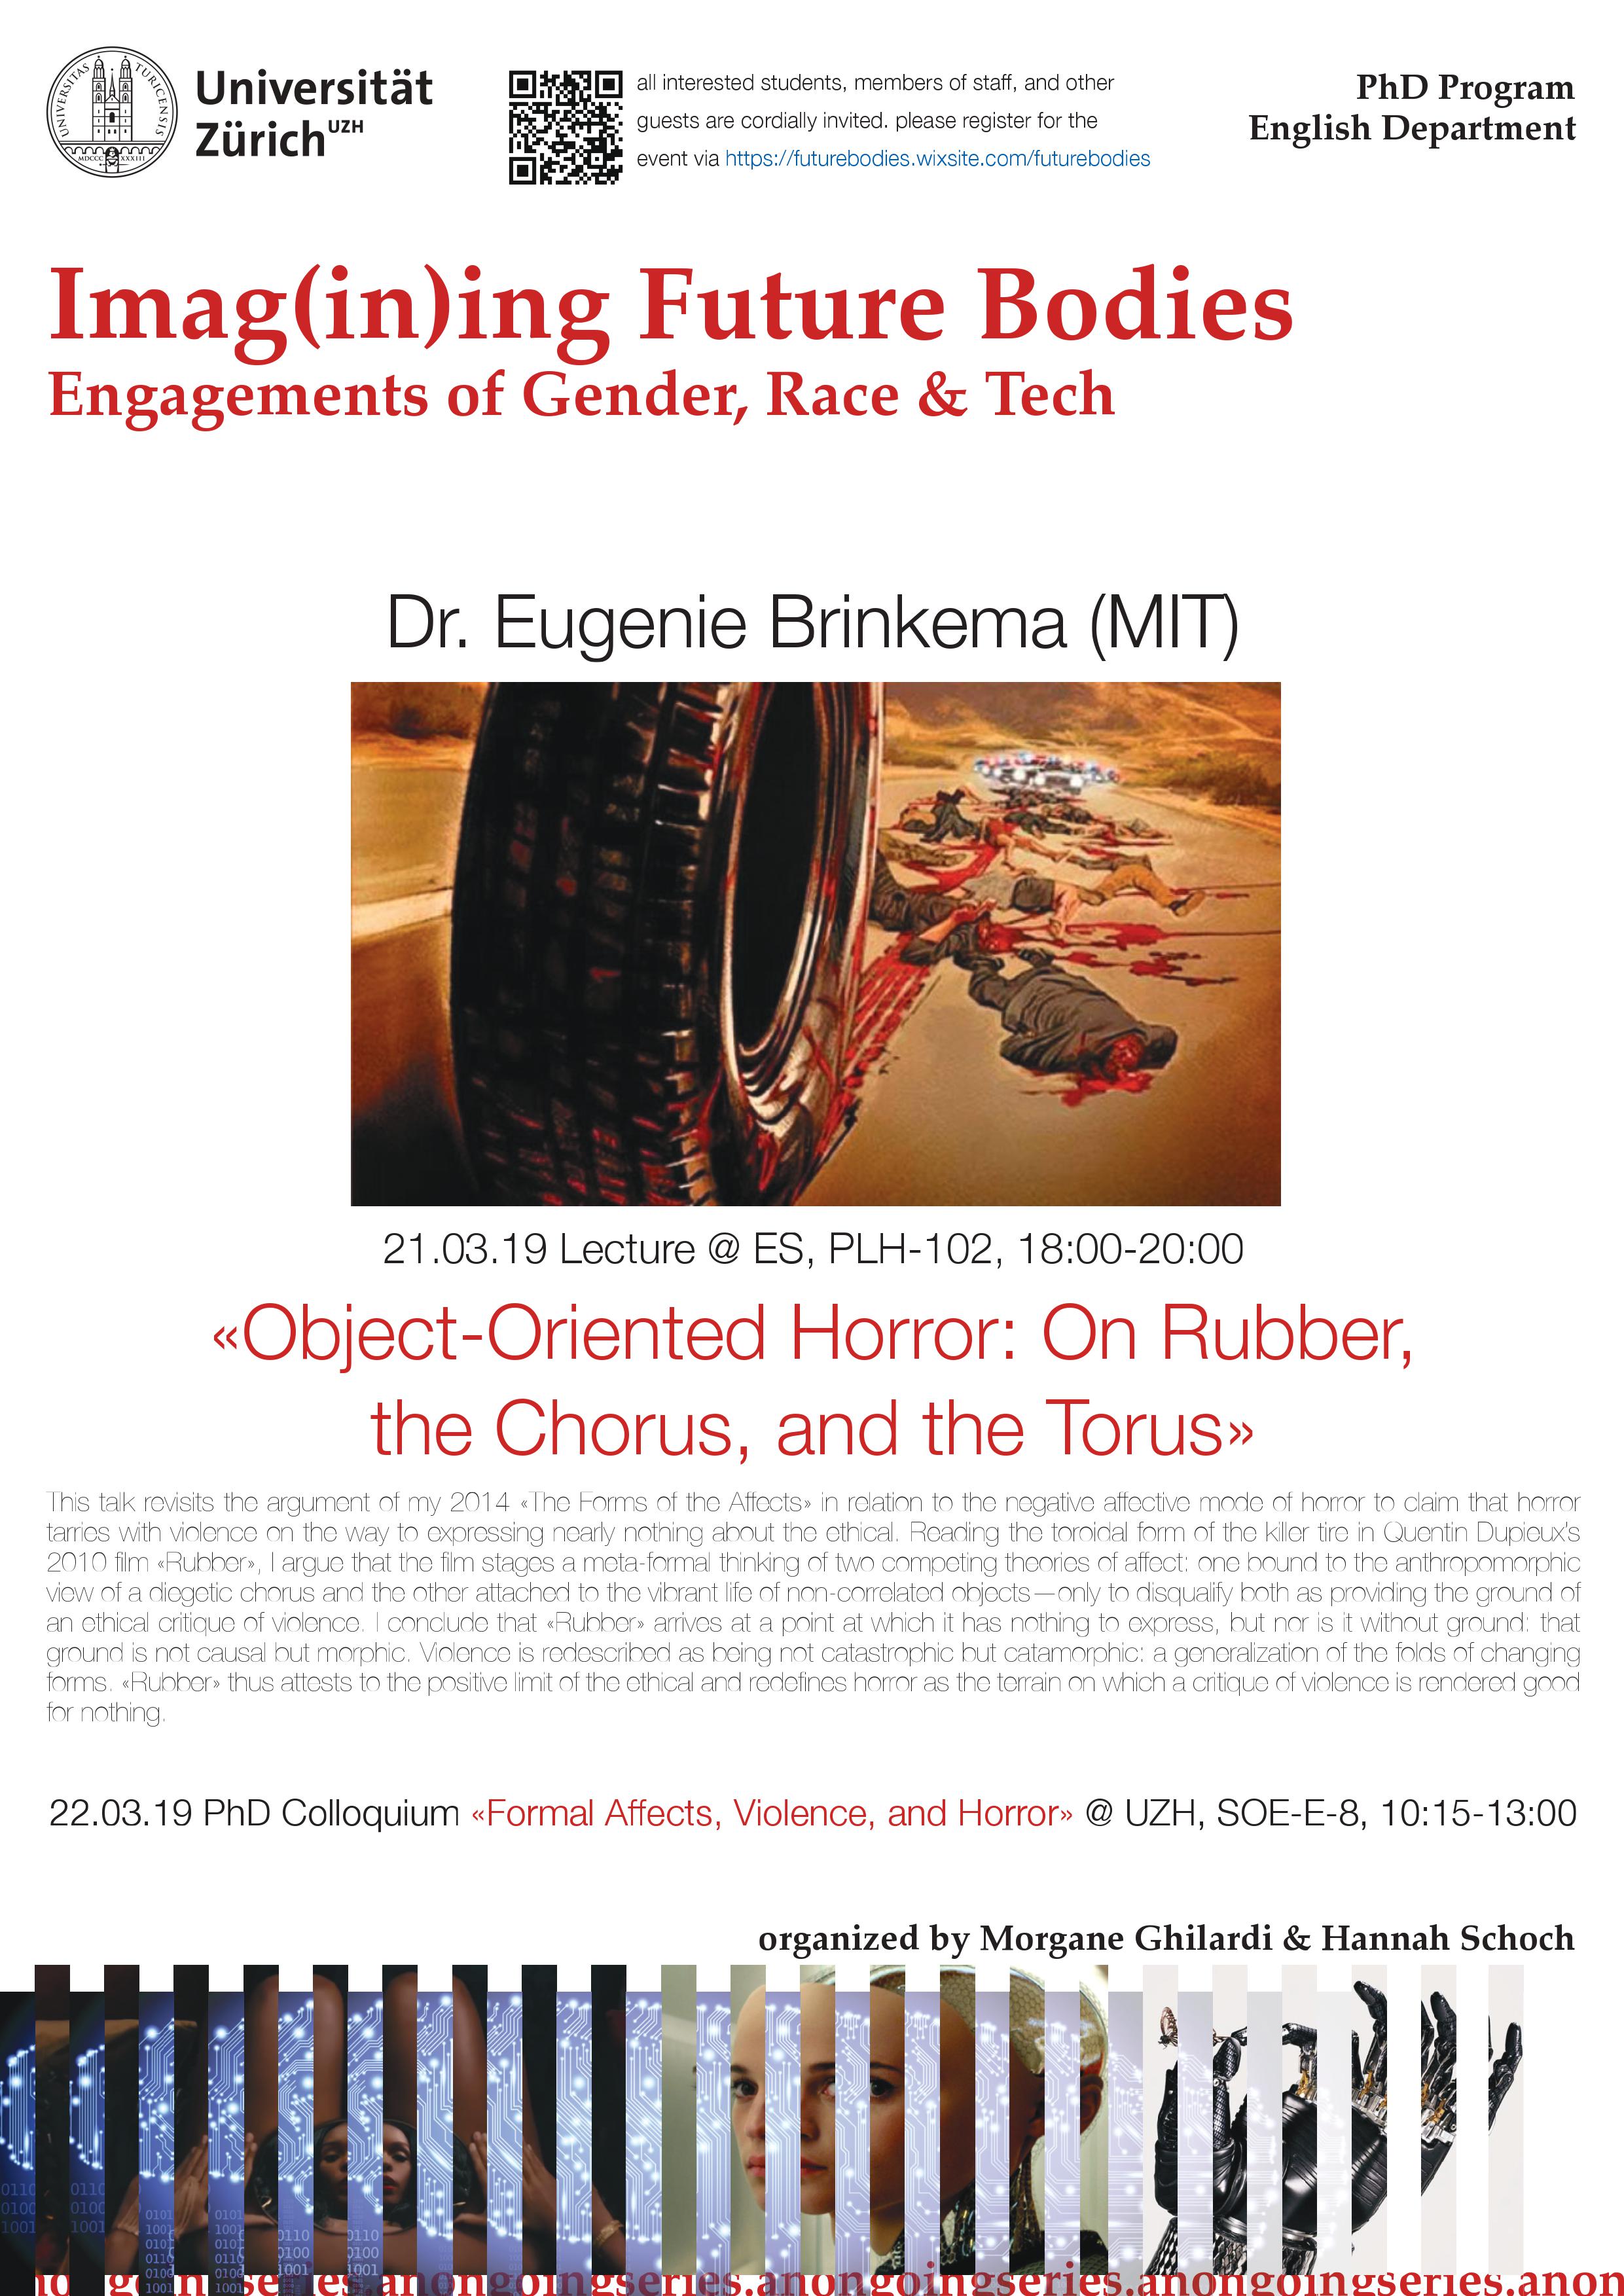 Imagining Future Bodies - Engagements of Gender, Race & Tech